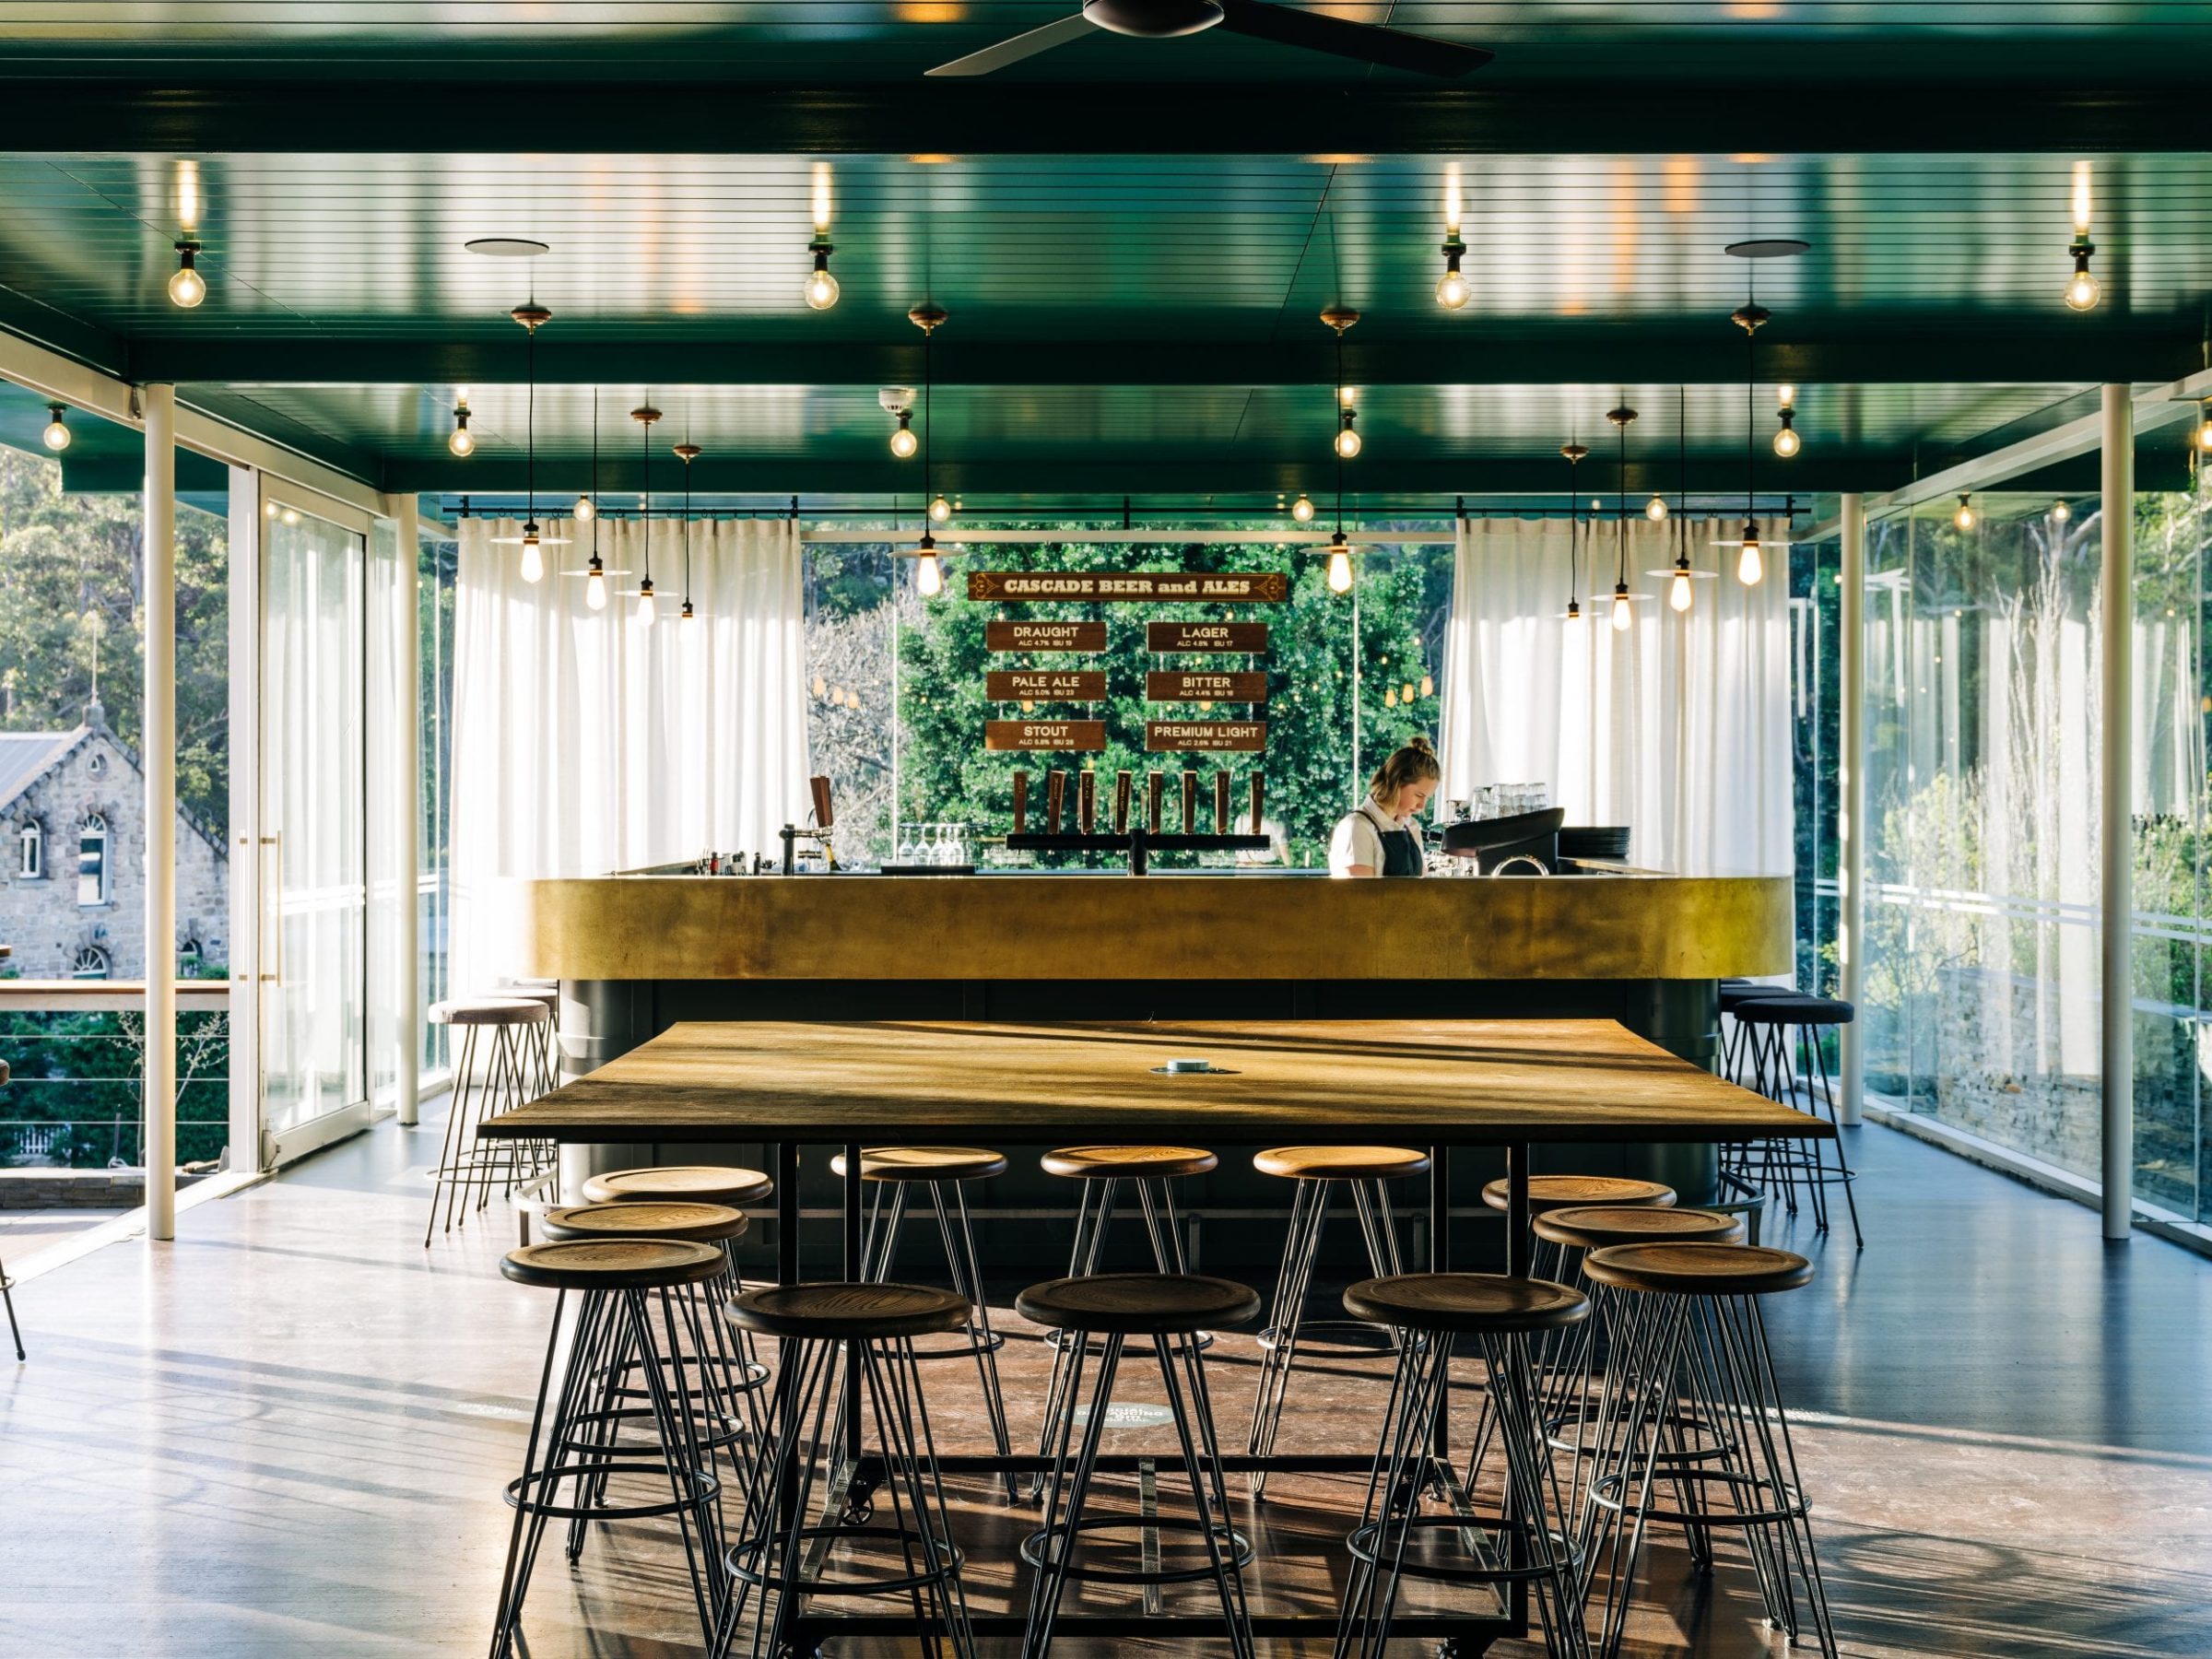 From bay views to beer taps, JAWS Architects uses Tasmanian Oak to tell a local story